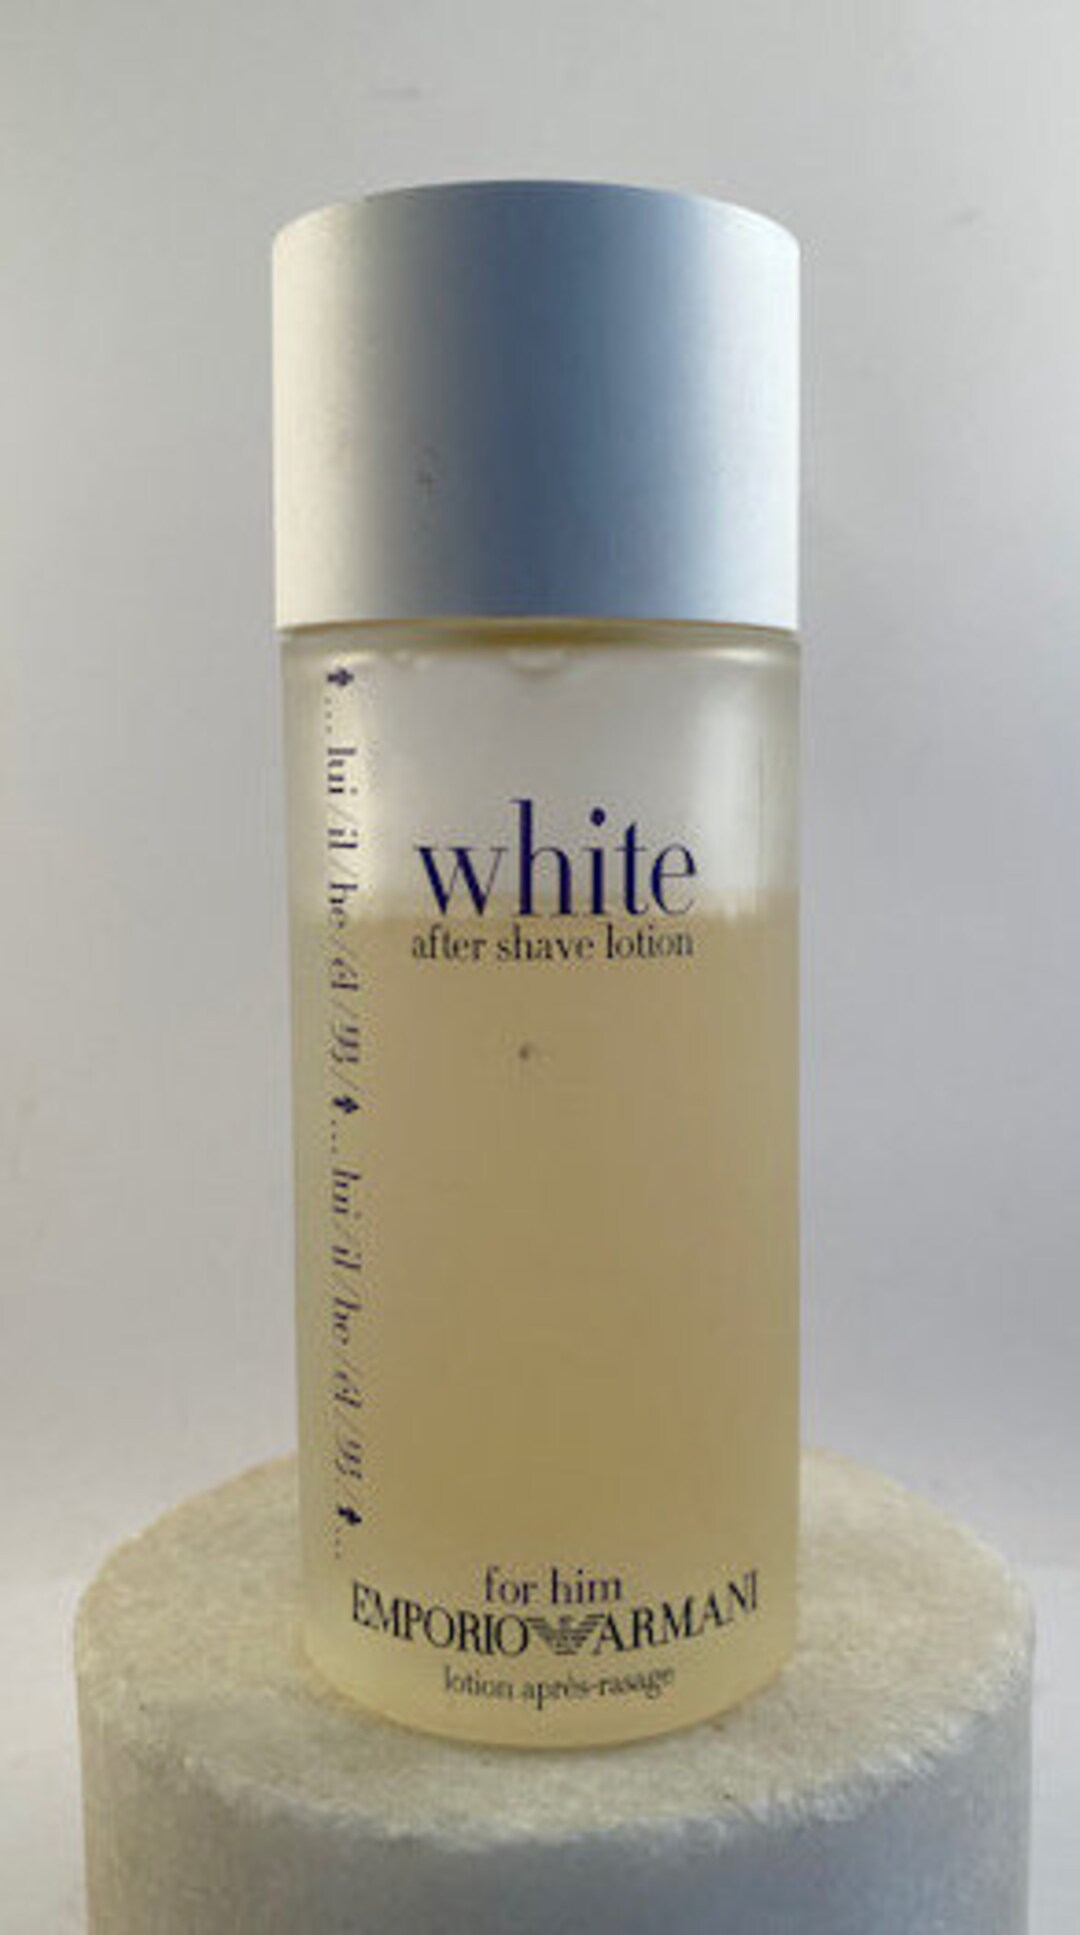 Armani white After Shave Lotion / Norway